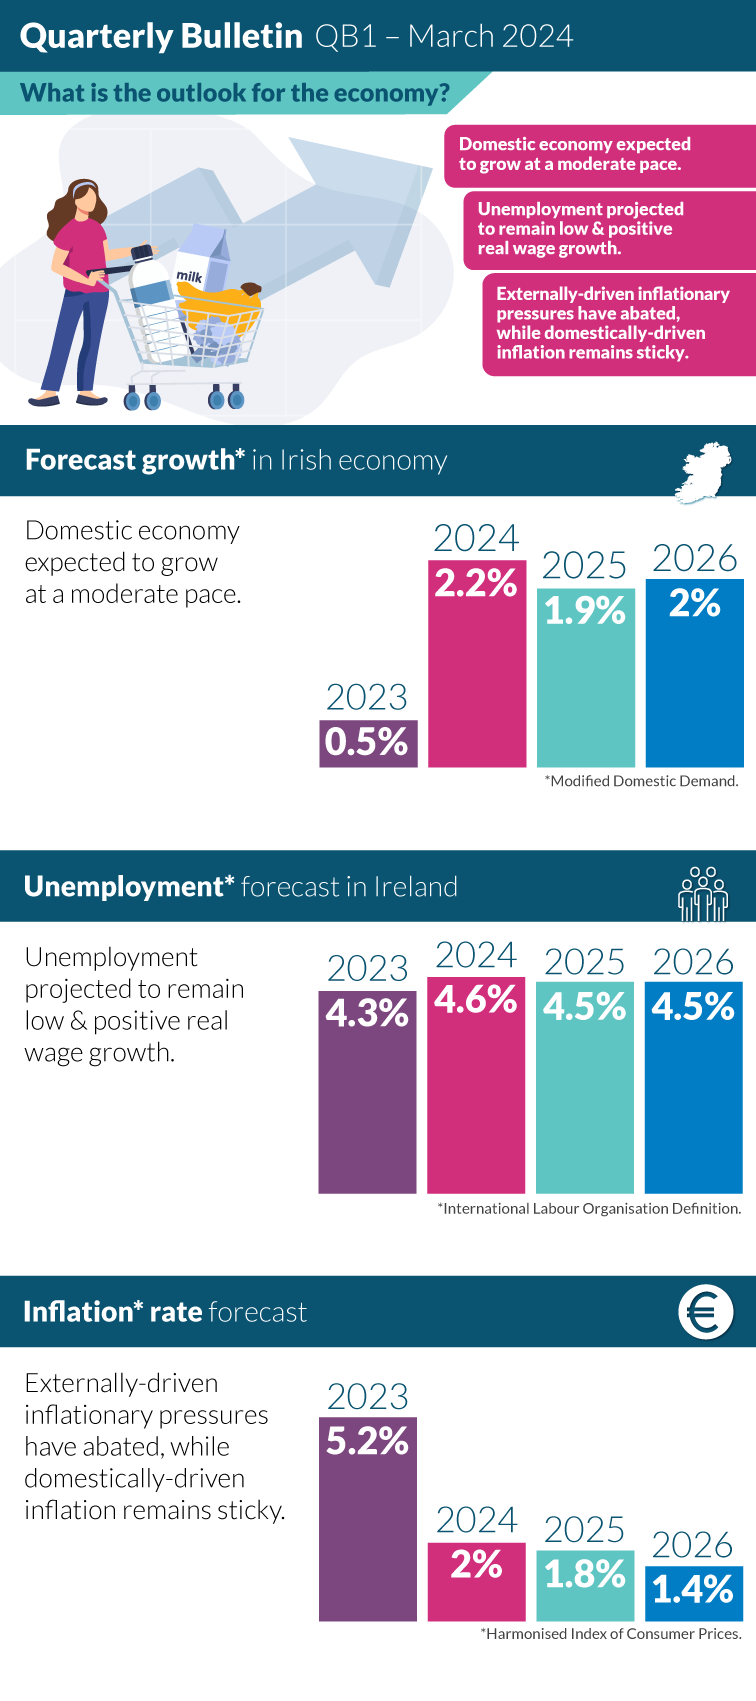 Unemployment, Inflation rate and Growth forecasts